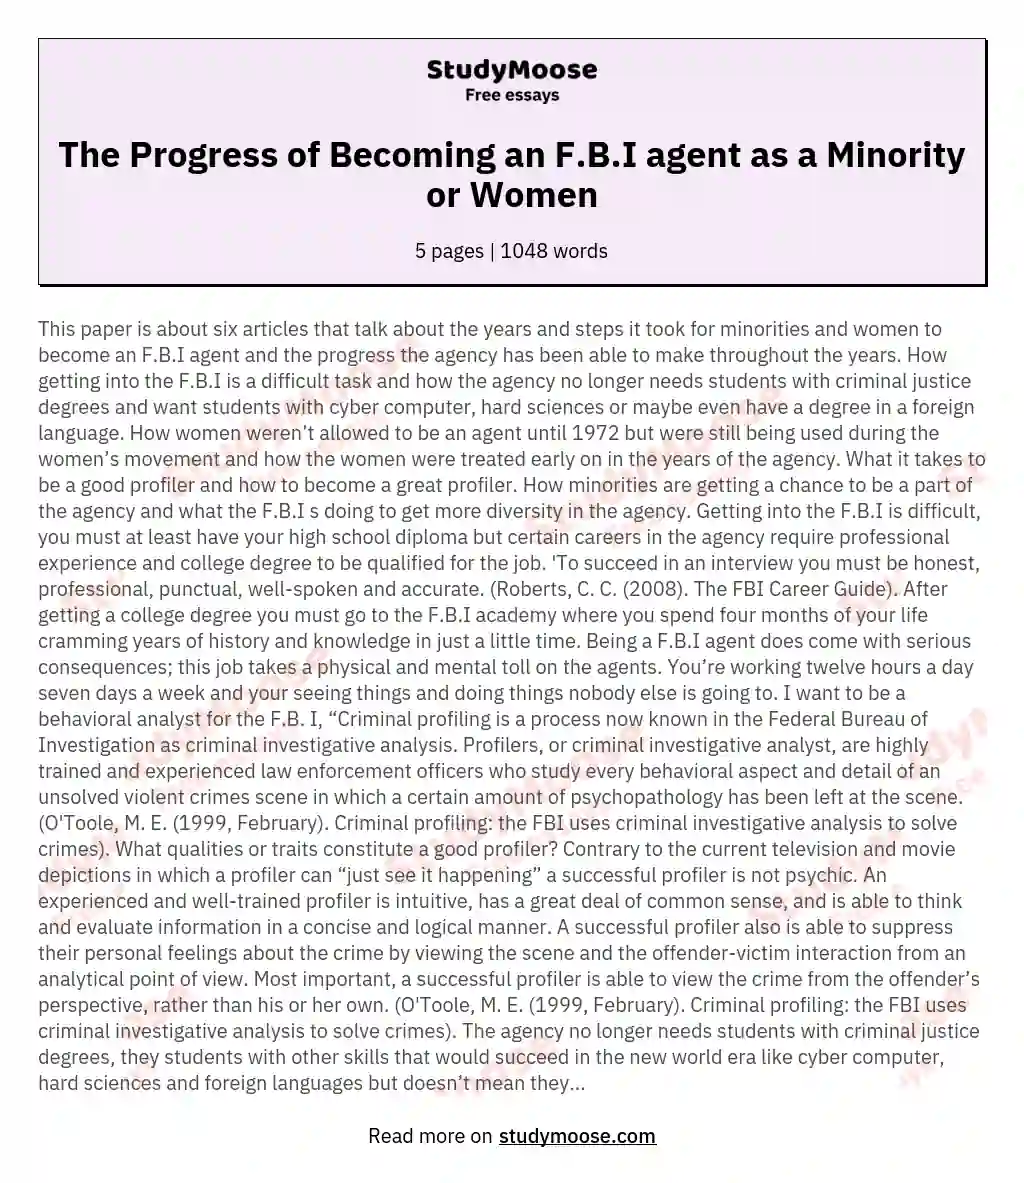 The Progress of Becoming an F.B.I agent as a Minority or Women essay